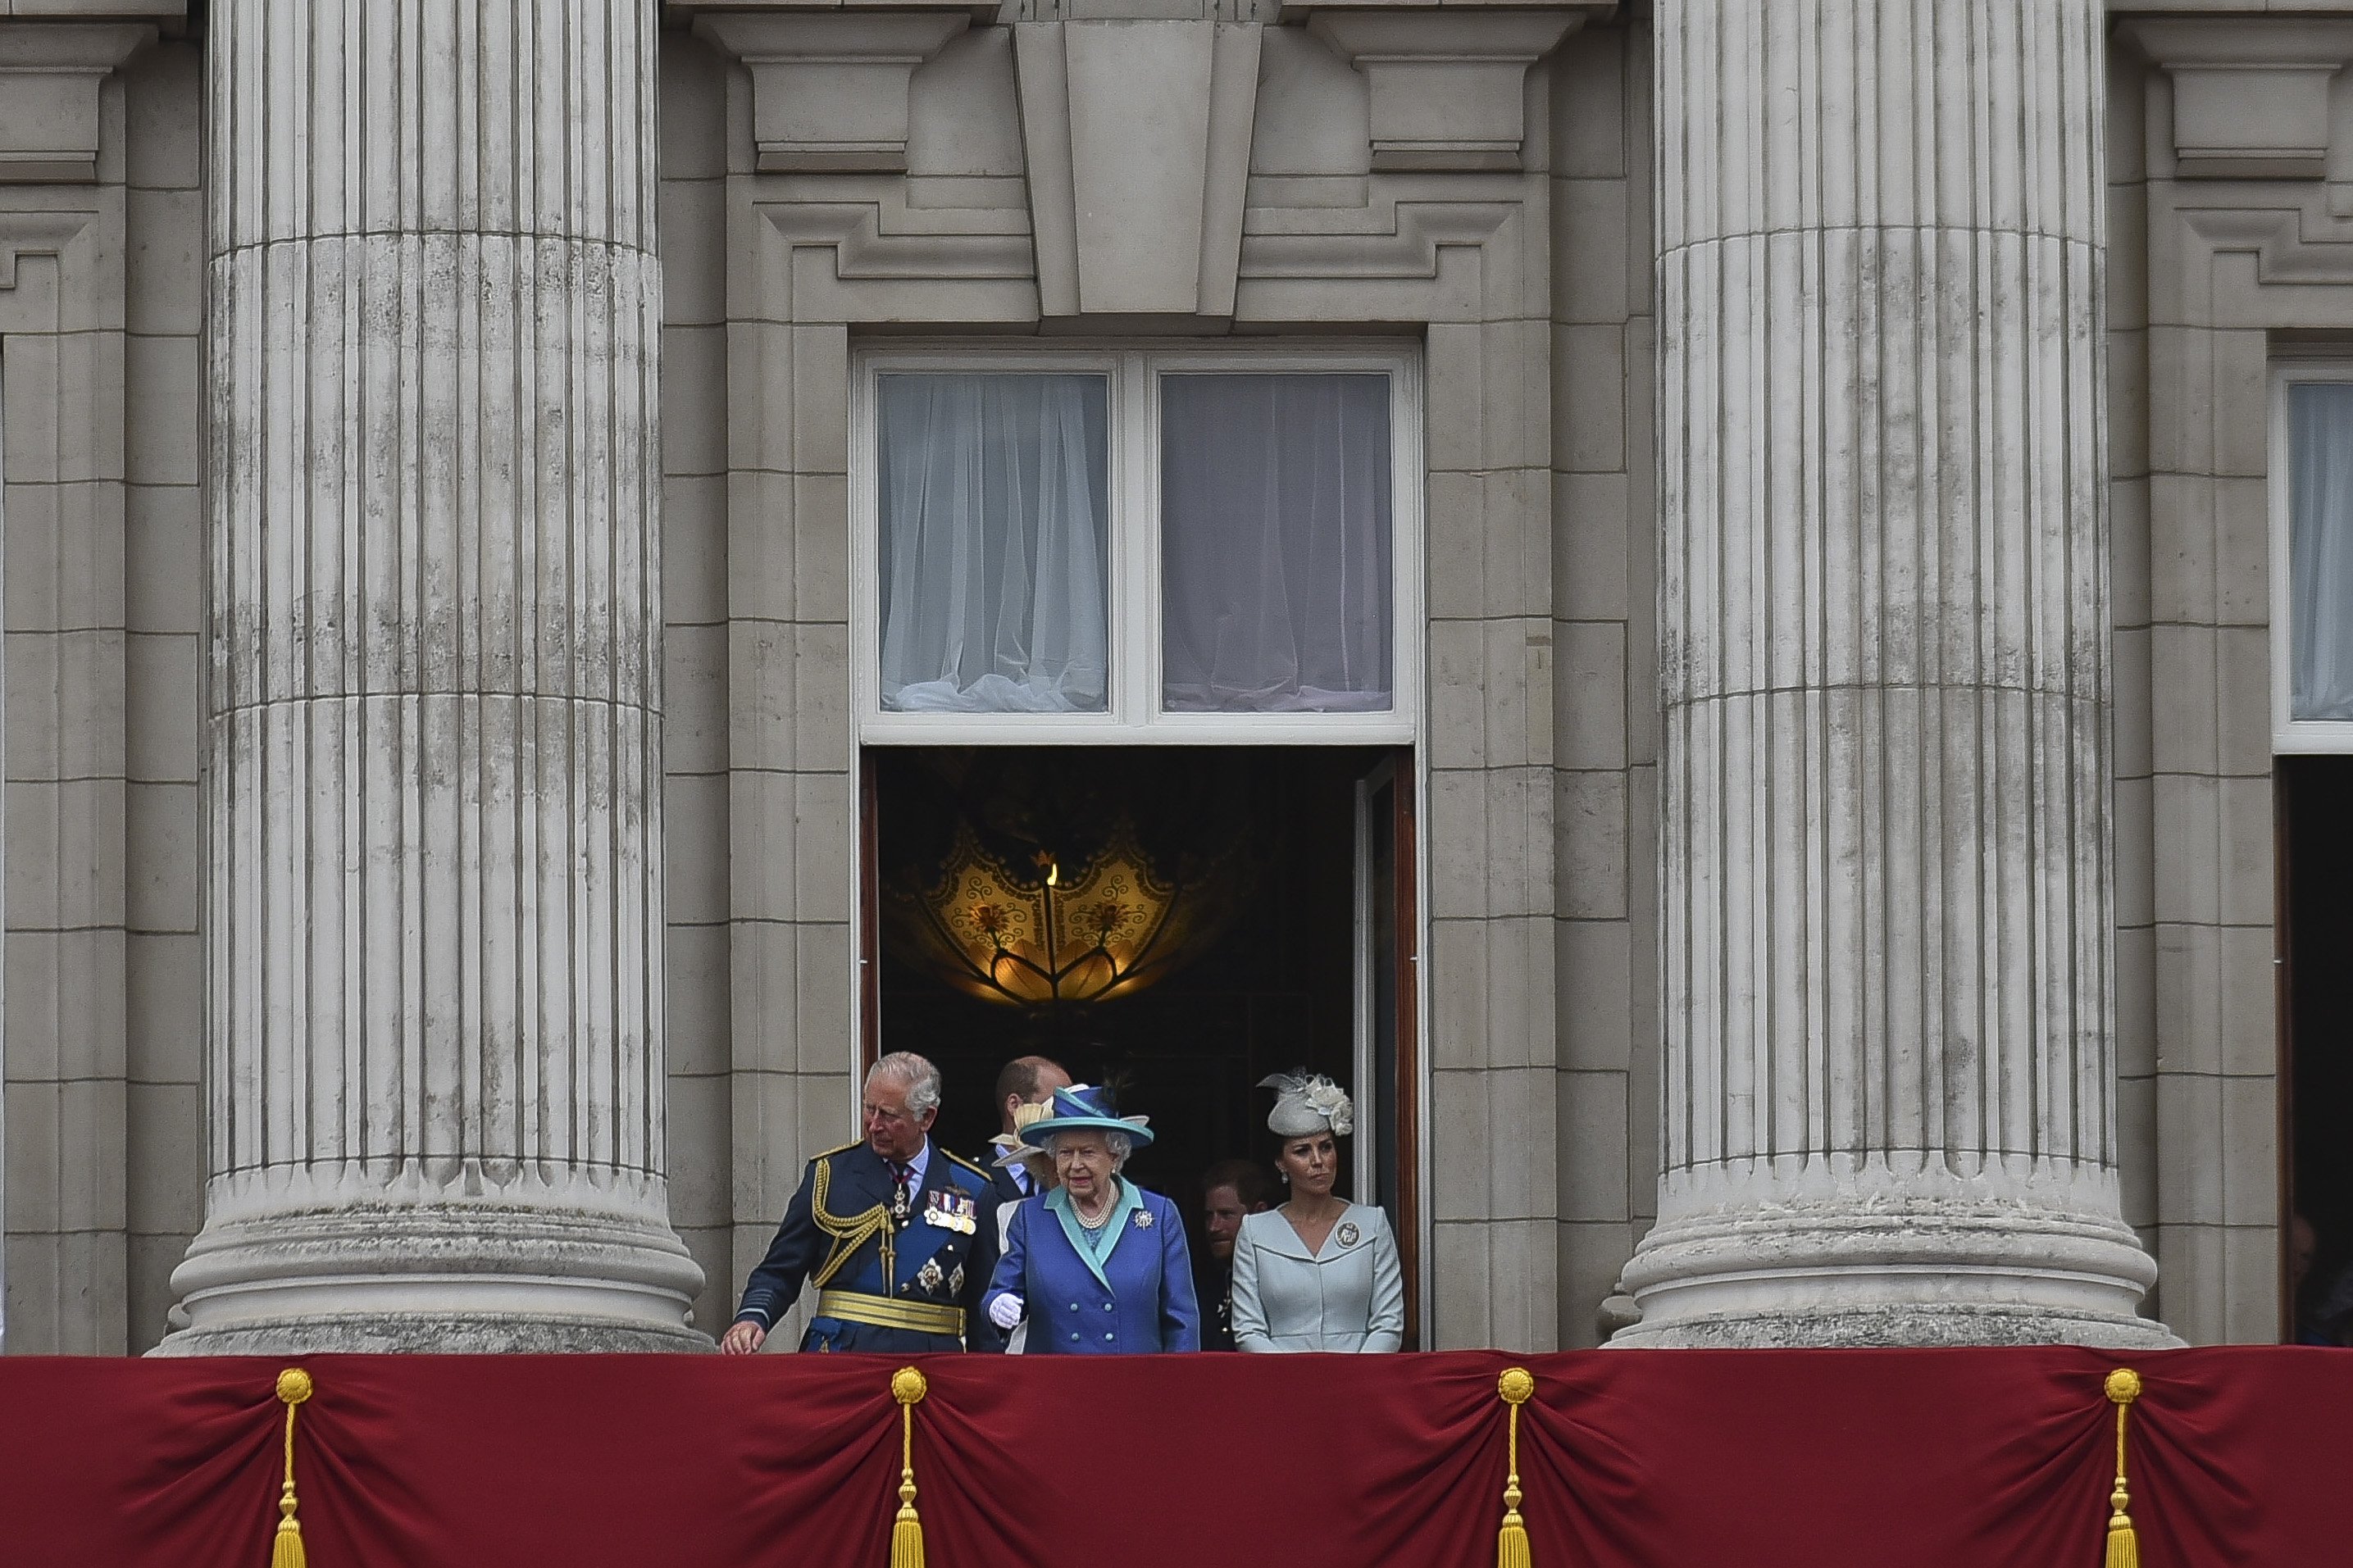 Queen Elizabeth II pictured arriving with other members of the Royal Family on the balcony of Buckingham Palace to watch a military flyby marking the centenary of the Royal Air Force (RAF) on July 10, 2018 in London, England.  / Source: Getty Images